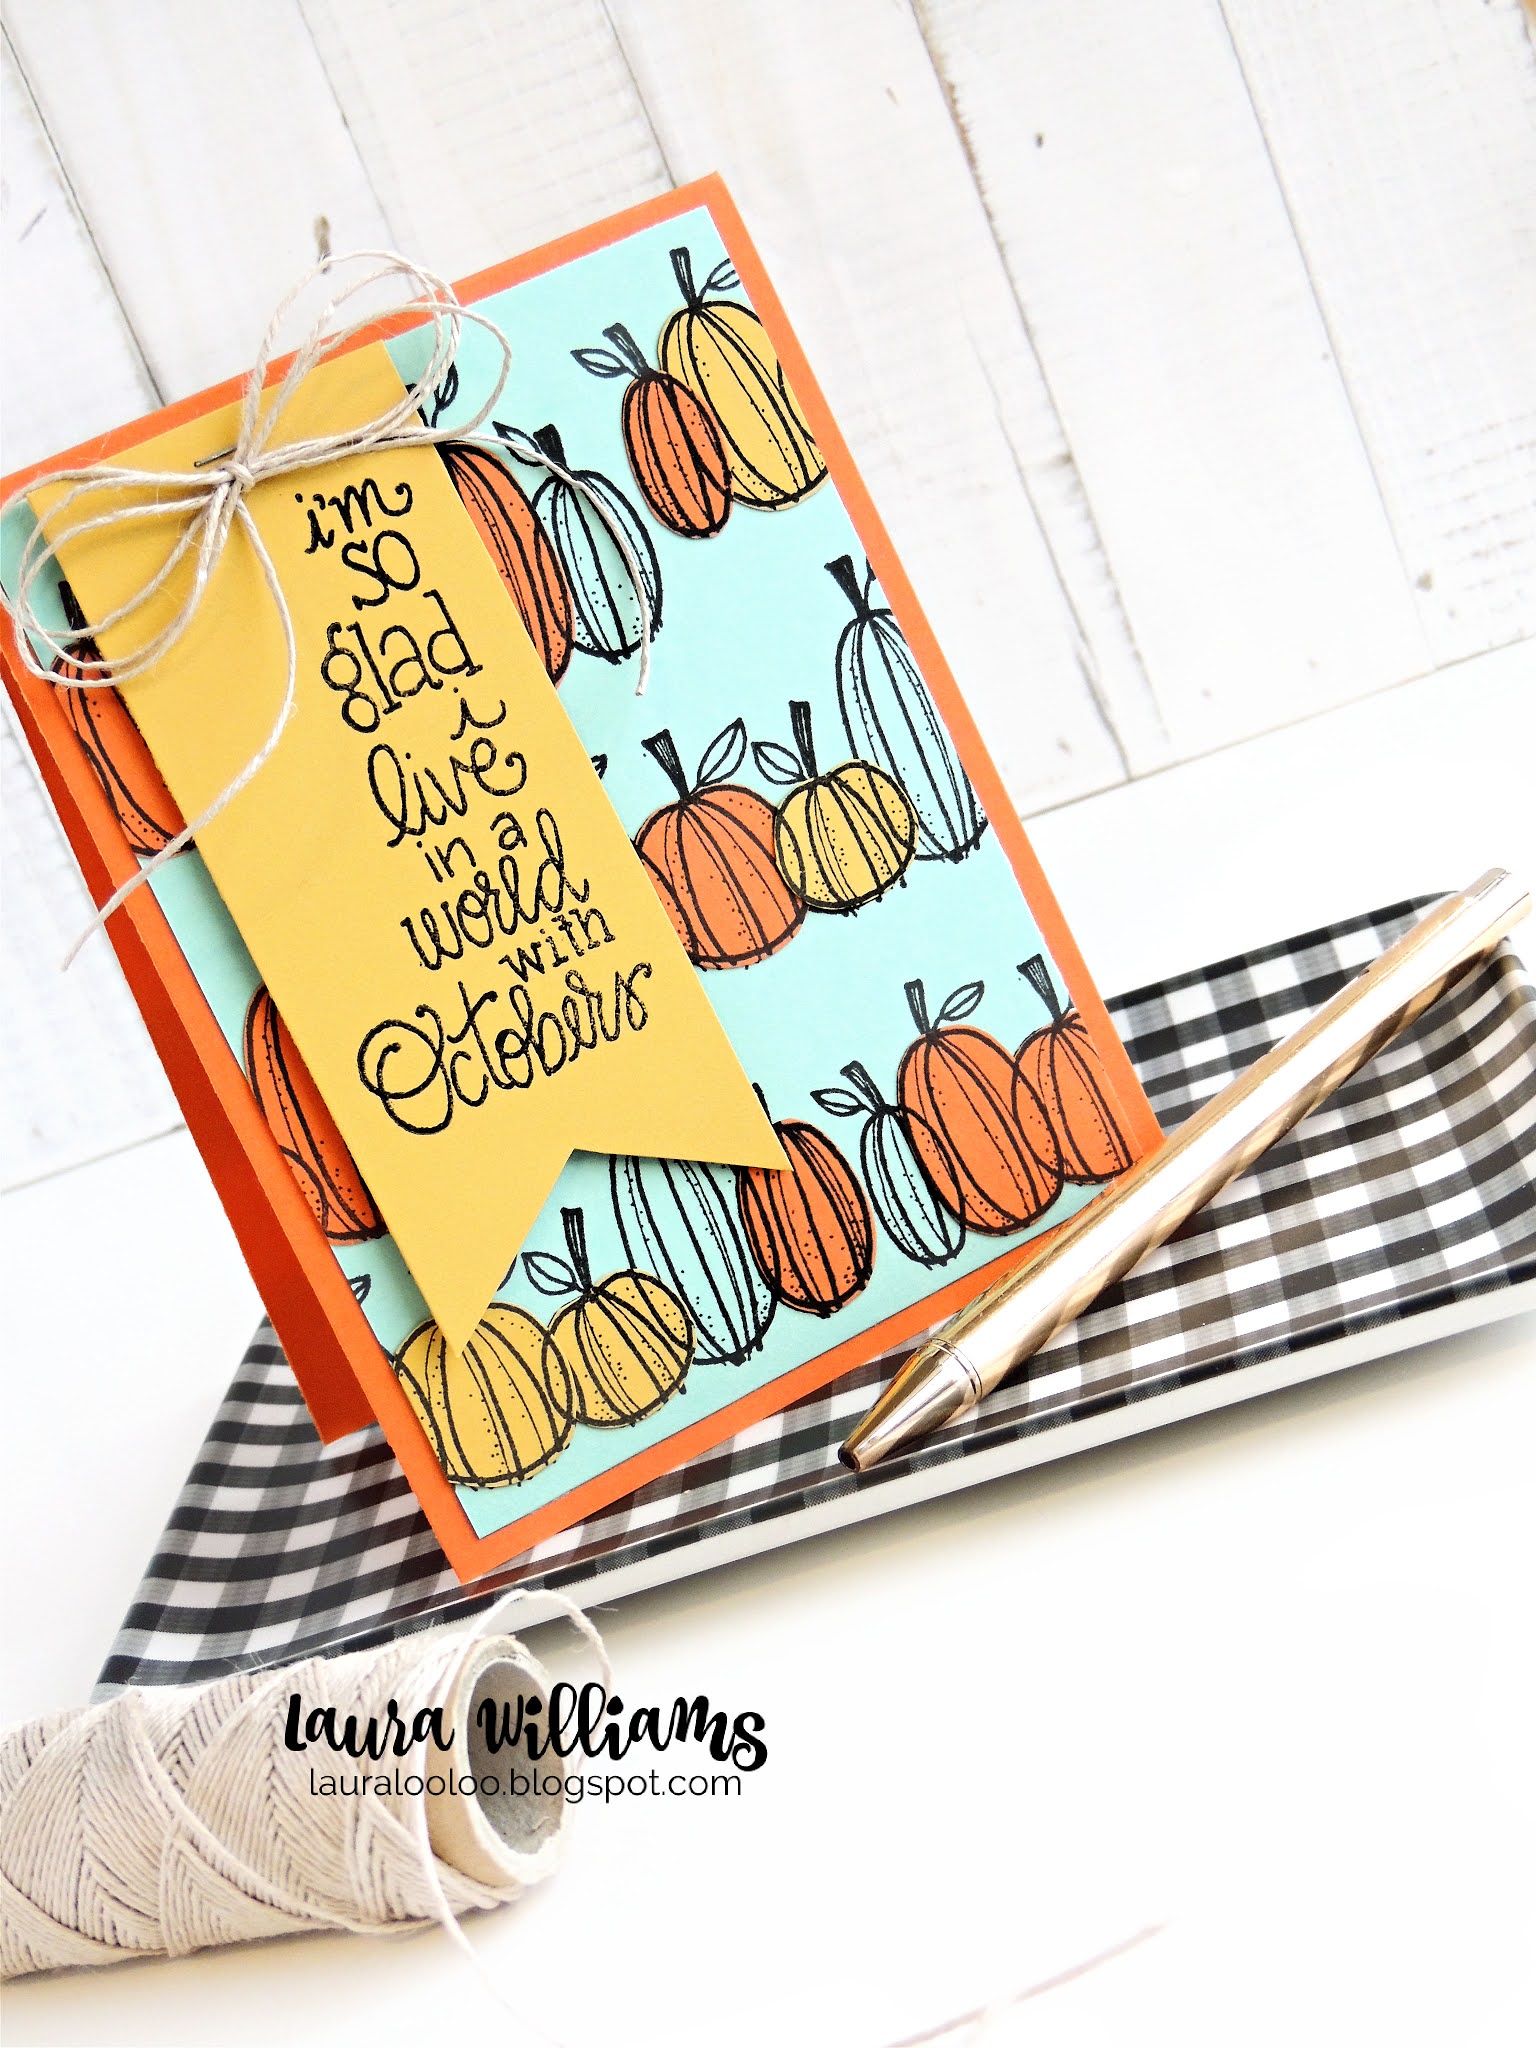 Make a handmade card for fall using the Pumpkin Pals stamp from Impression Obsession. Homemade cards for autumn are fun to make in shades of yellow, orange, and aqua. Click to see ideas for DIY cards and paper crafts using stamps and die cutting.